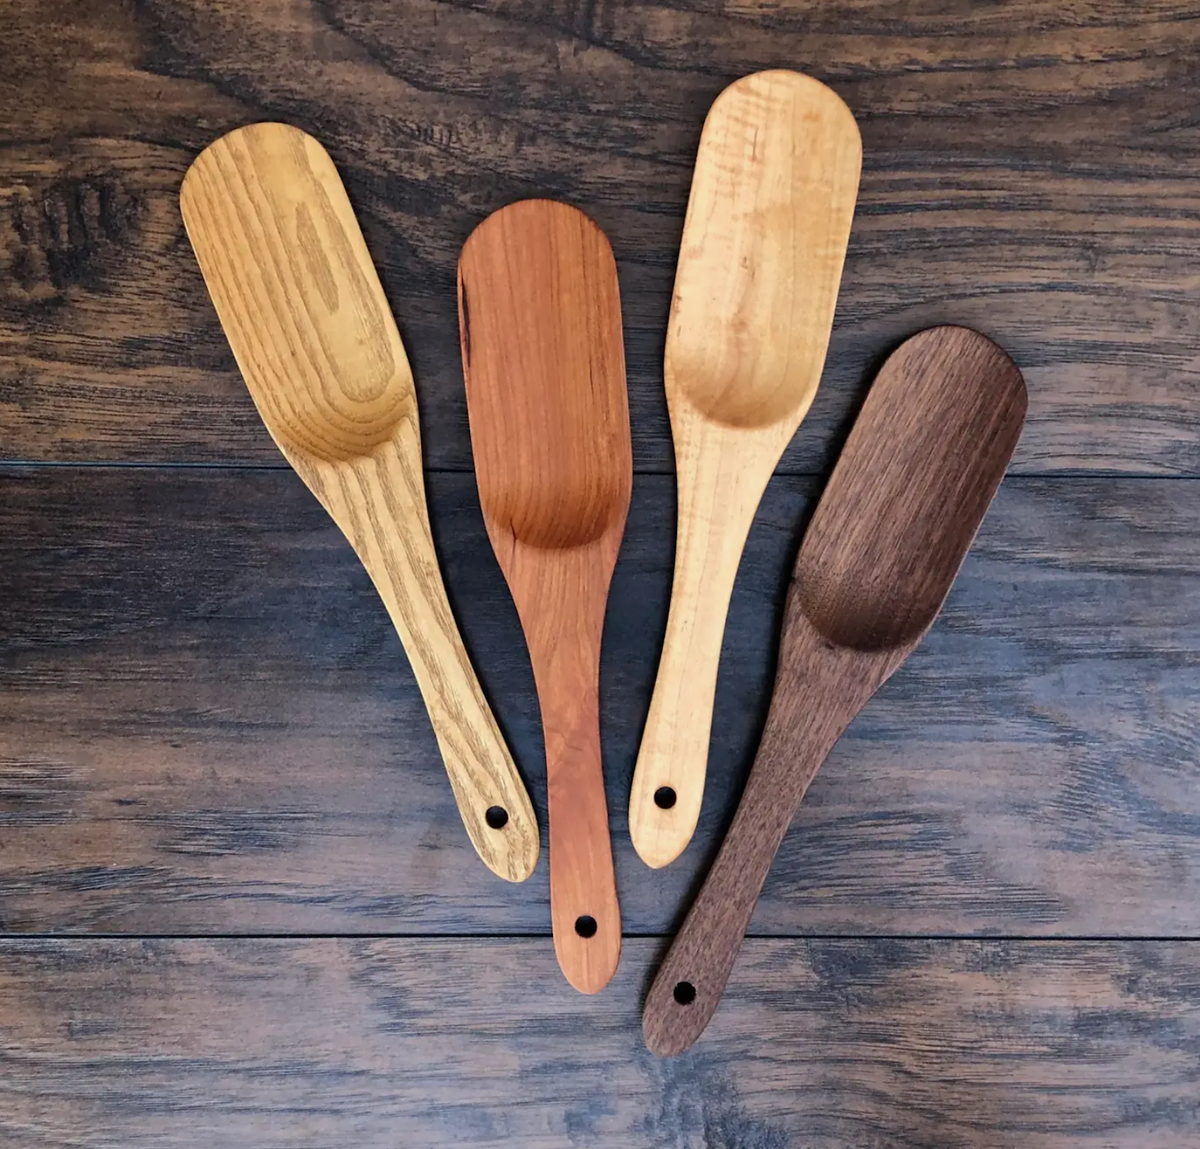 https://www.abeautifulmesshome.shop/wp-content/uploads/1695/97/our-wooden-spoonula-faire-the-riley-land-collection-is-the-latest-in-technology_0.png